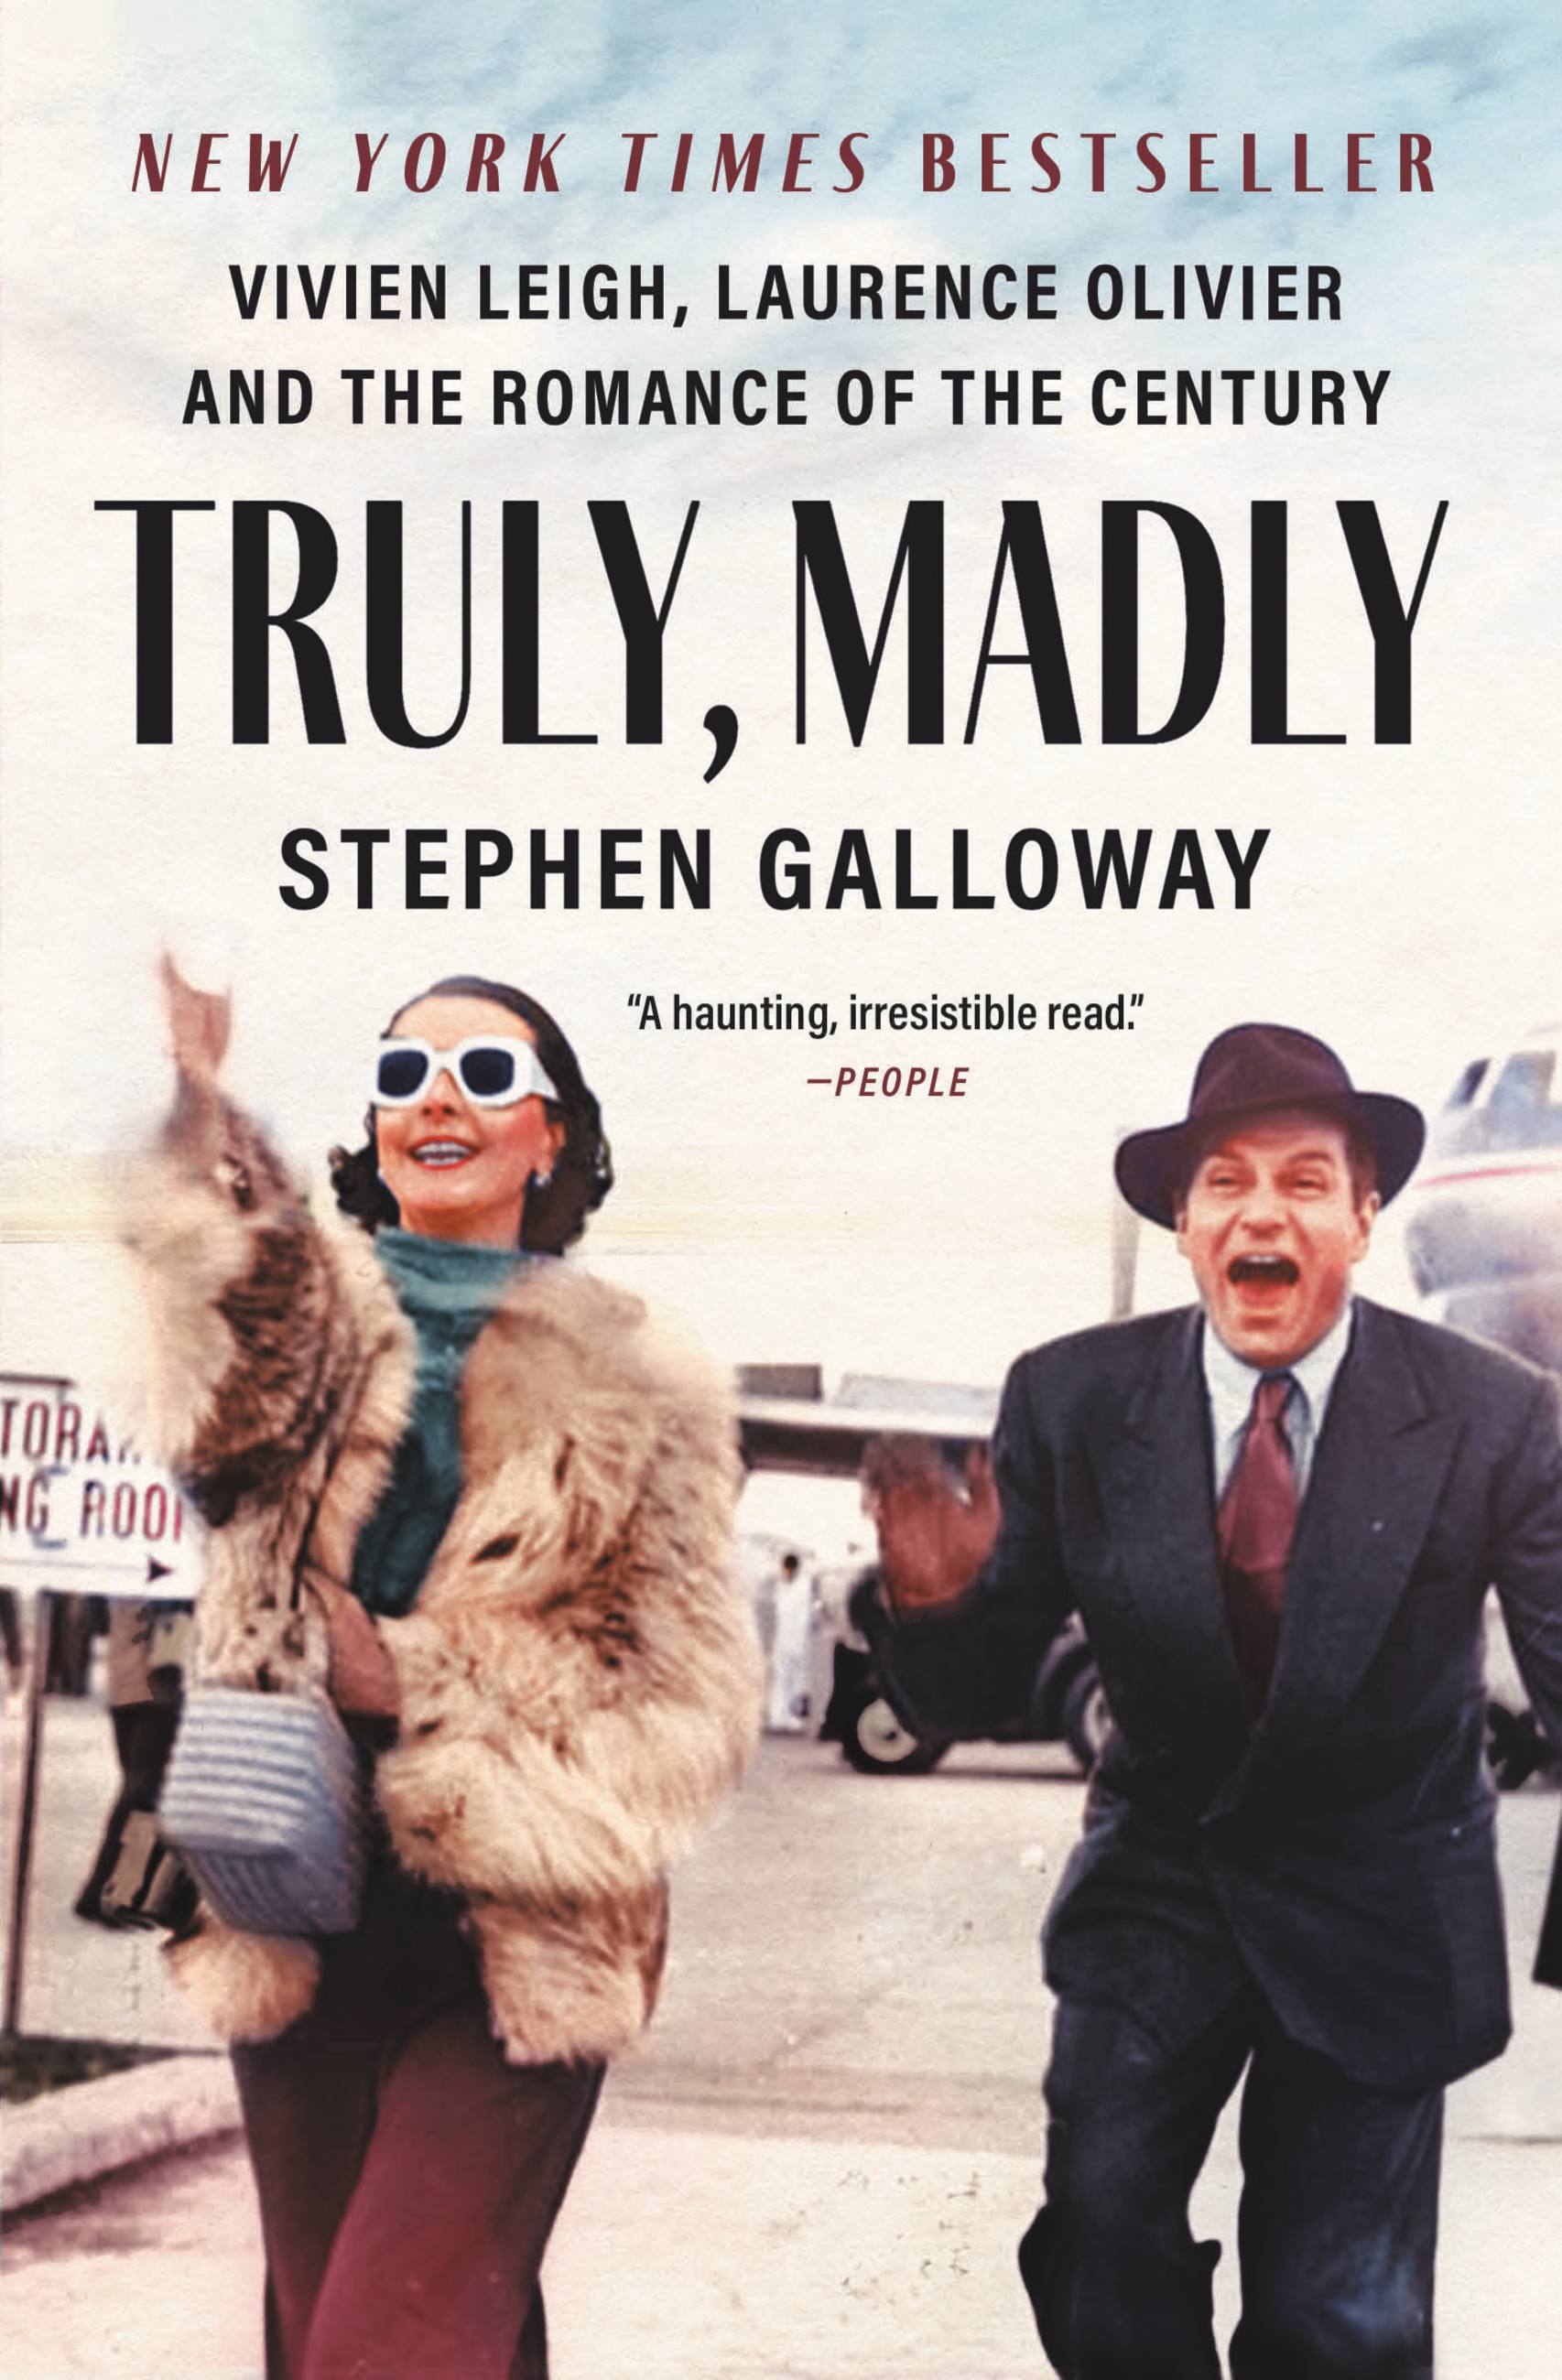 Truly, Madly by Stephen Galloway Hachette Book Group image pic